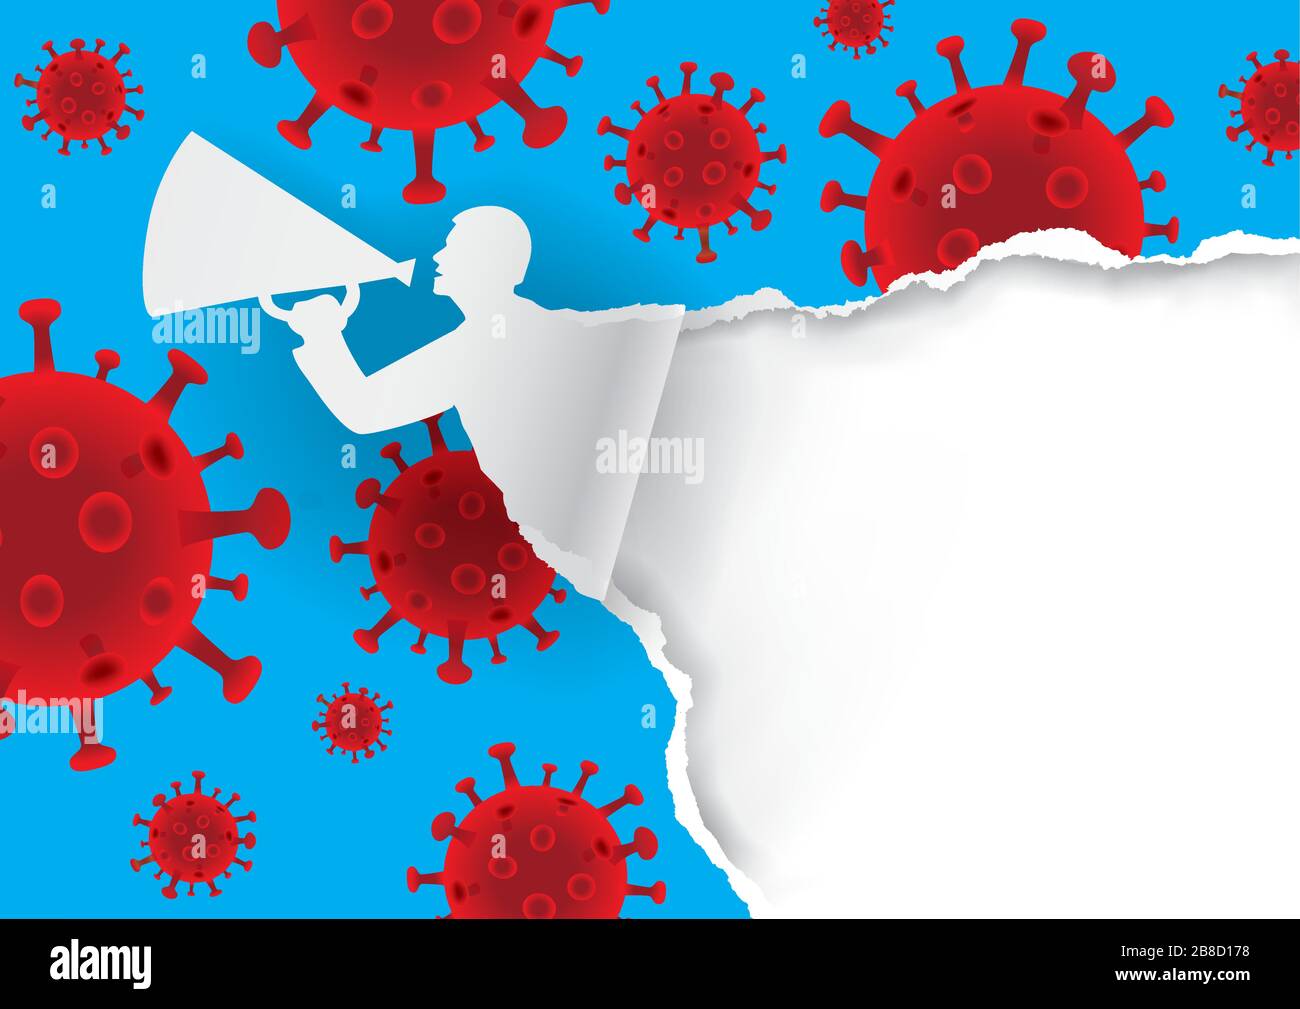 Man with megaphone ripped paper with Coronavirus symbols. Expressive Template for announcement for coronavirus pandemic theme. Place for your text. Stock Vector